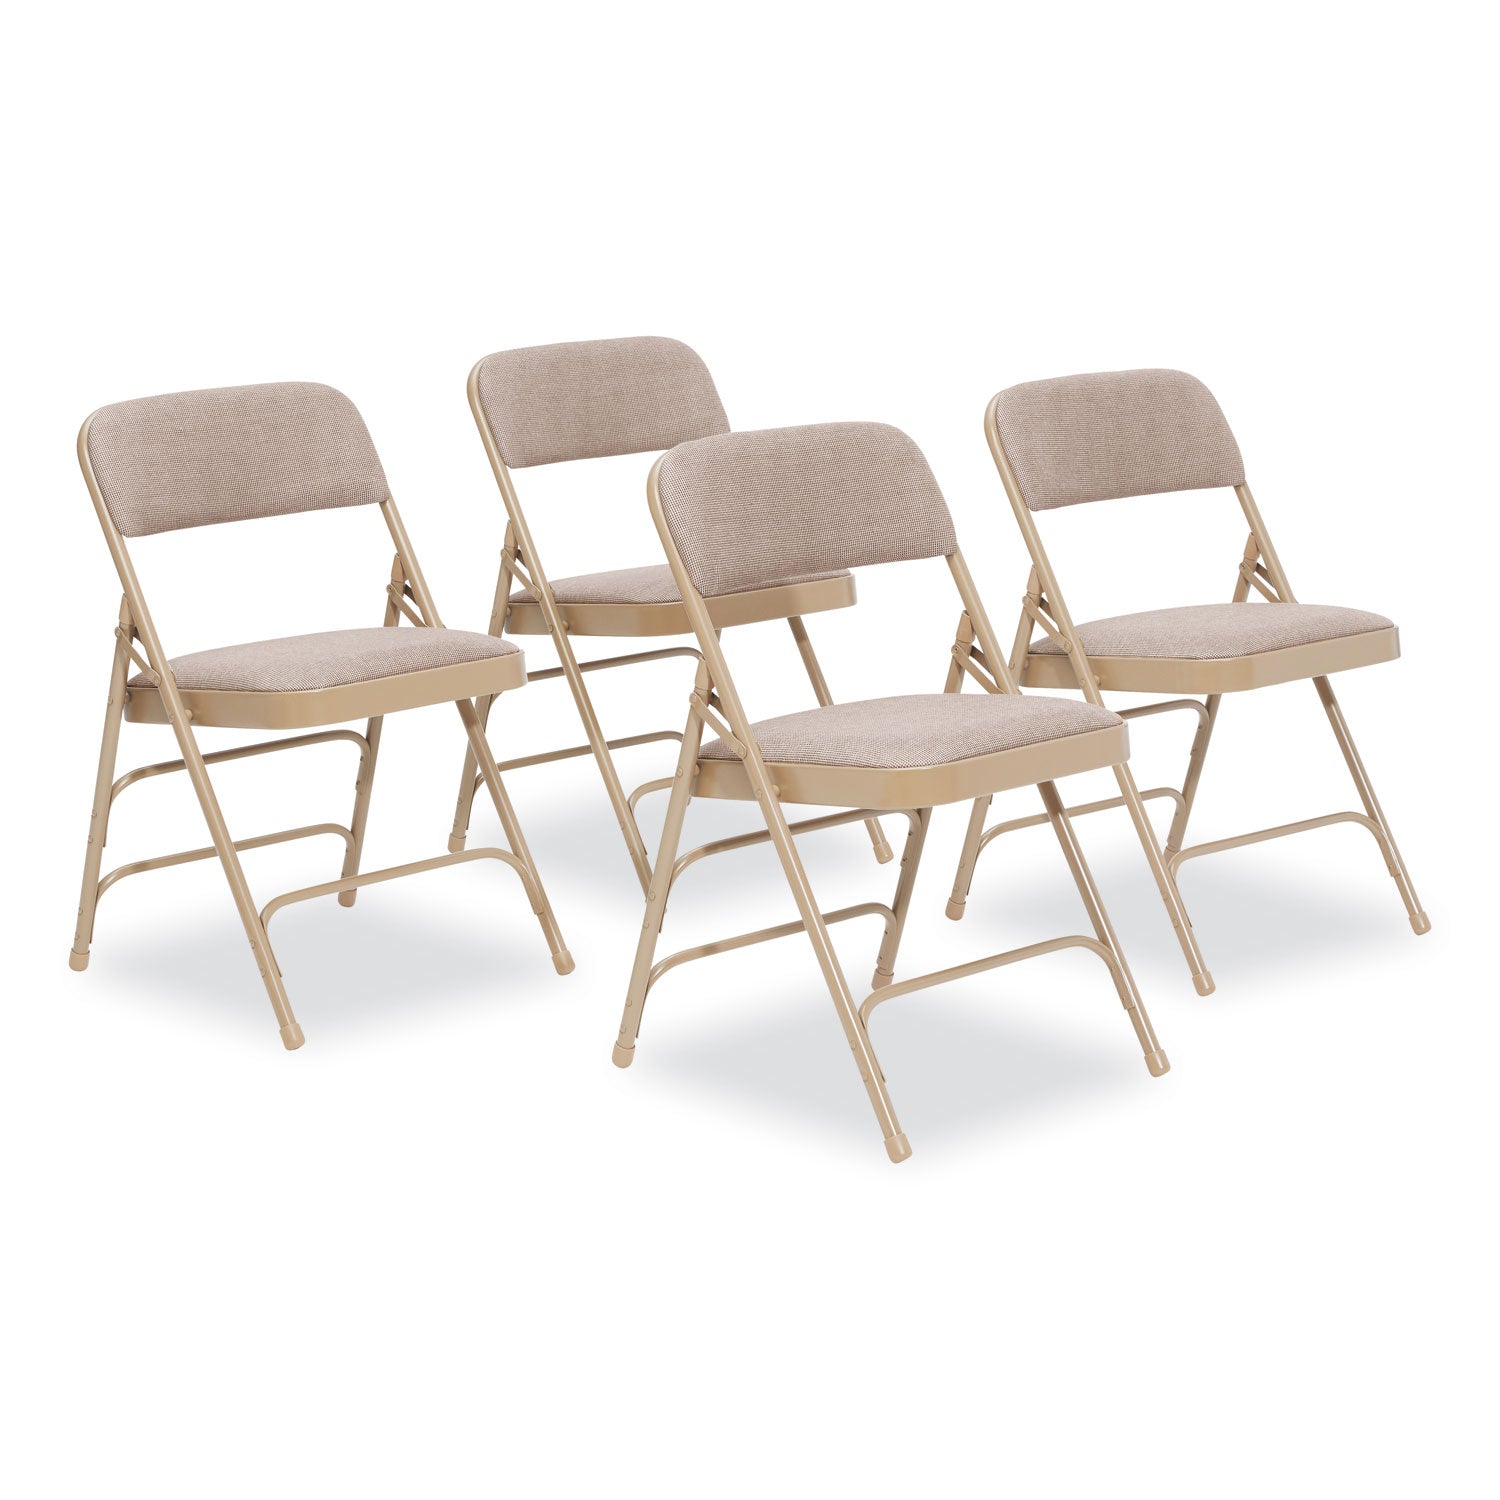 2300-series-fabric-triple-brace-double-hinge-premium-folding-chair-supports-500-lb-cafe-beige-4-ct-ships-in-1-3-bus-days_nps2301 - 1